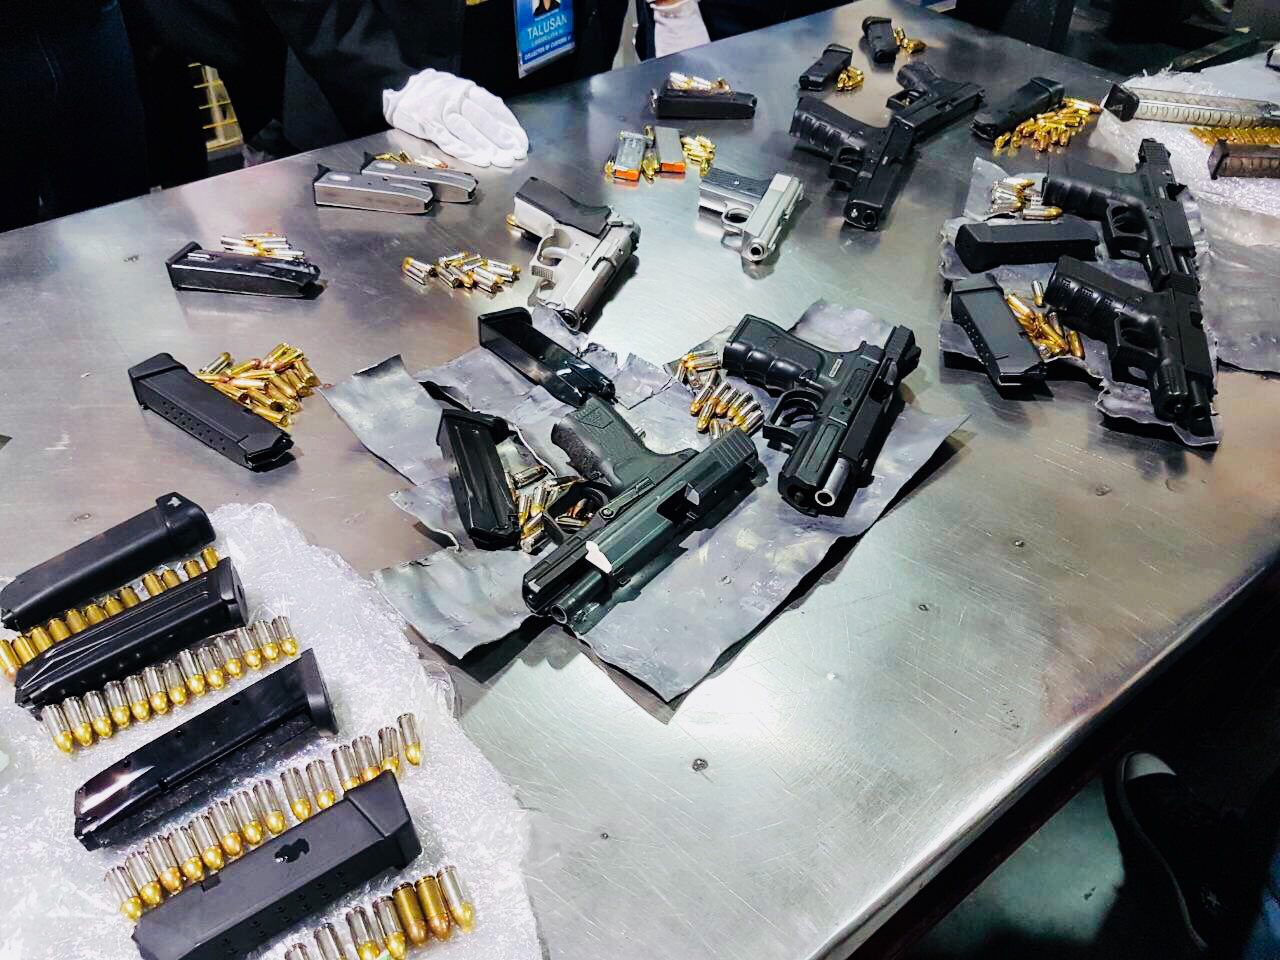 Customs confiscates cache of firearms, ammunition in Pasay City